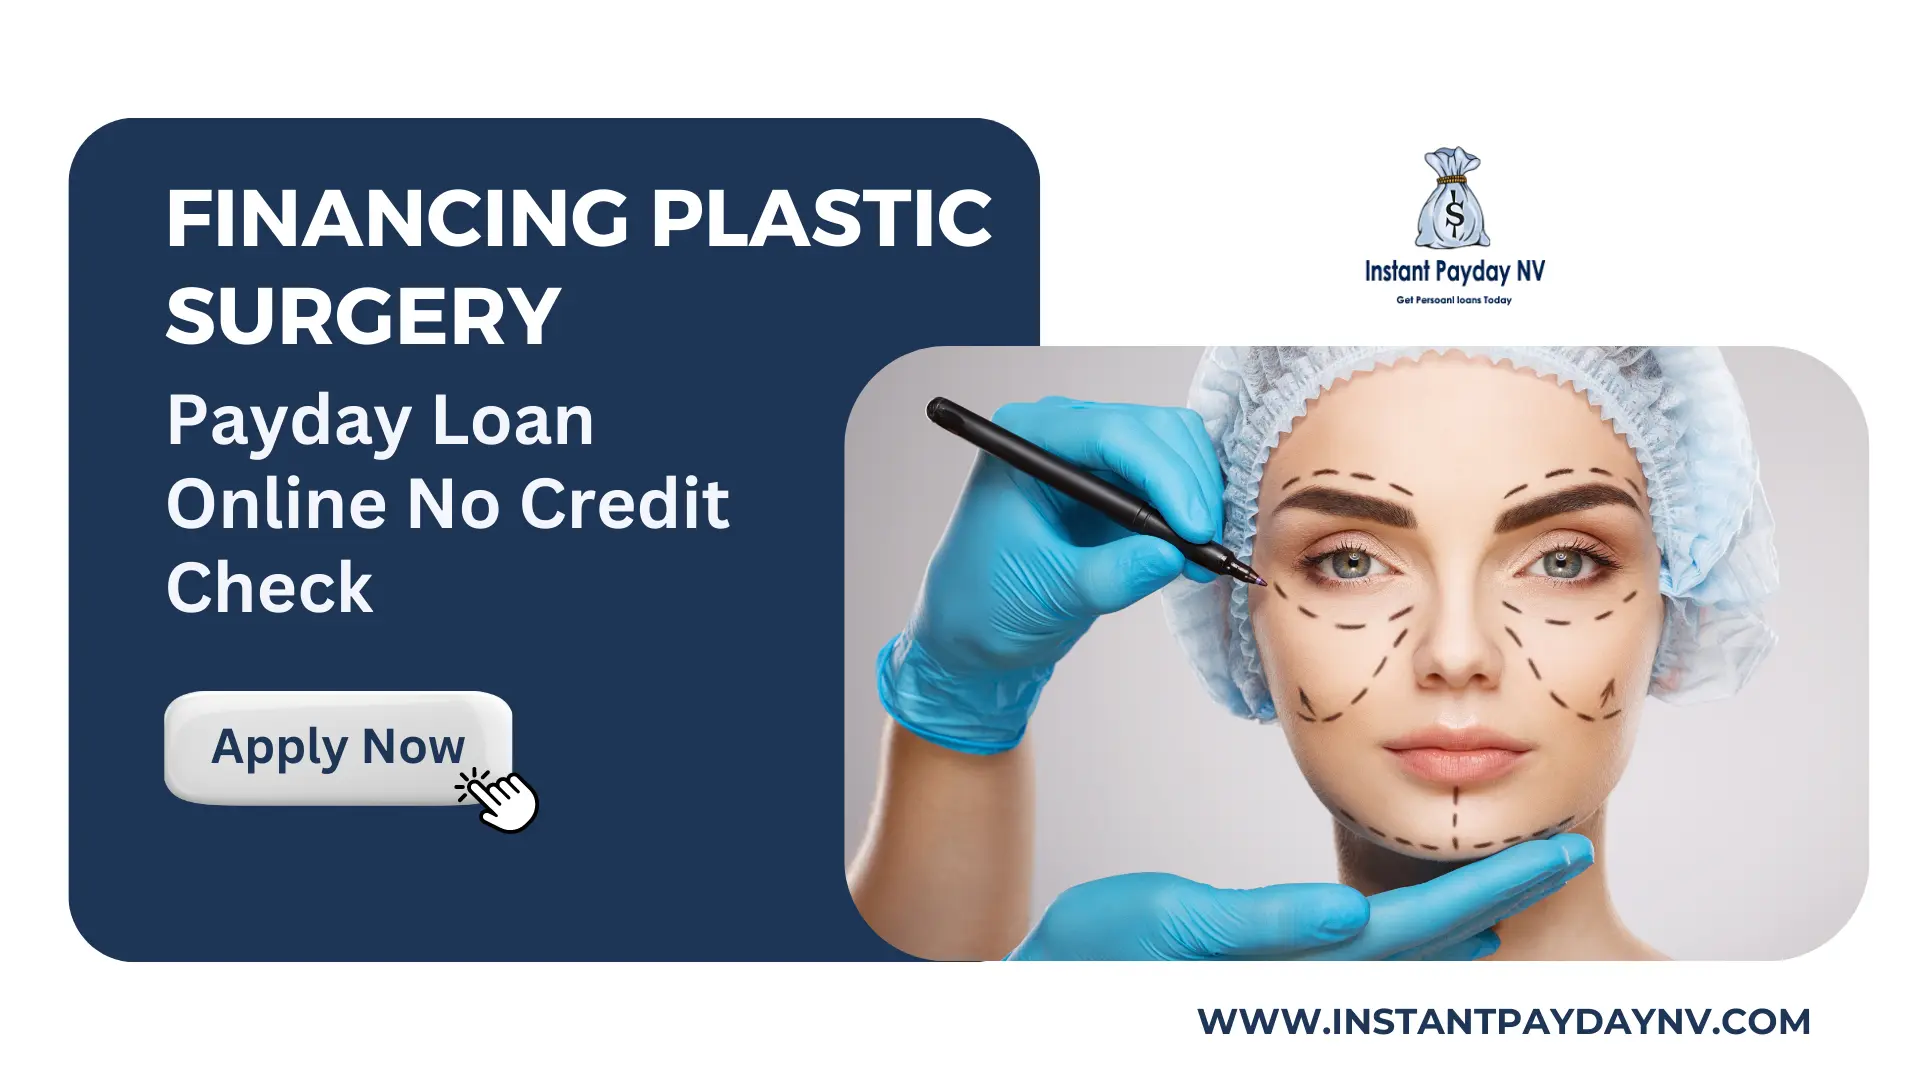 Financing Plastic Surgery with Payday Loan Online No Credit Check